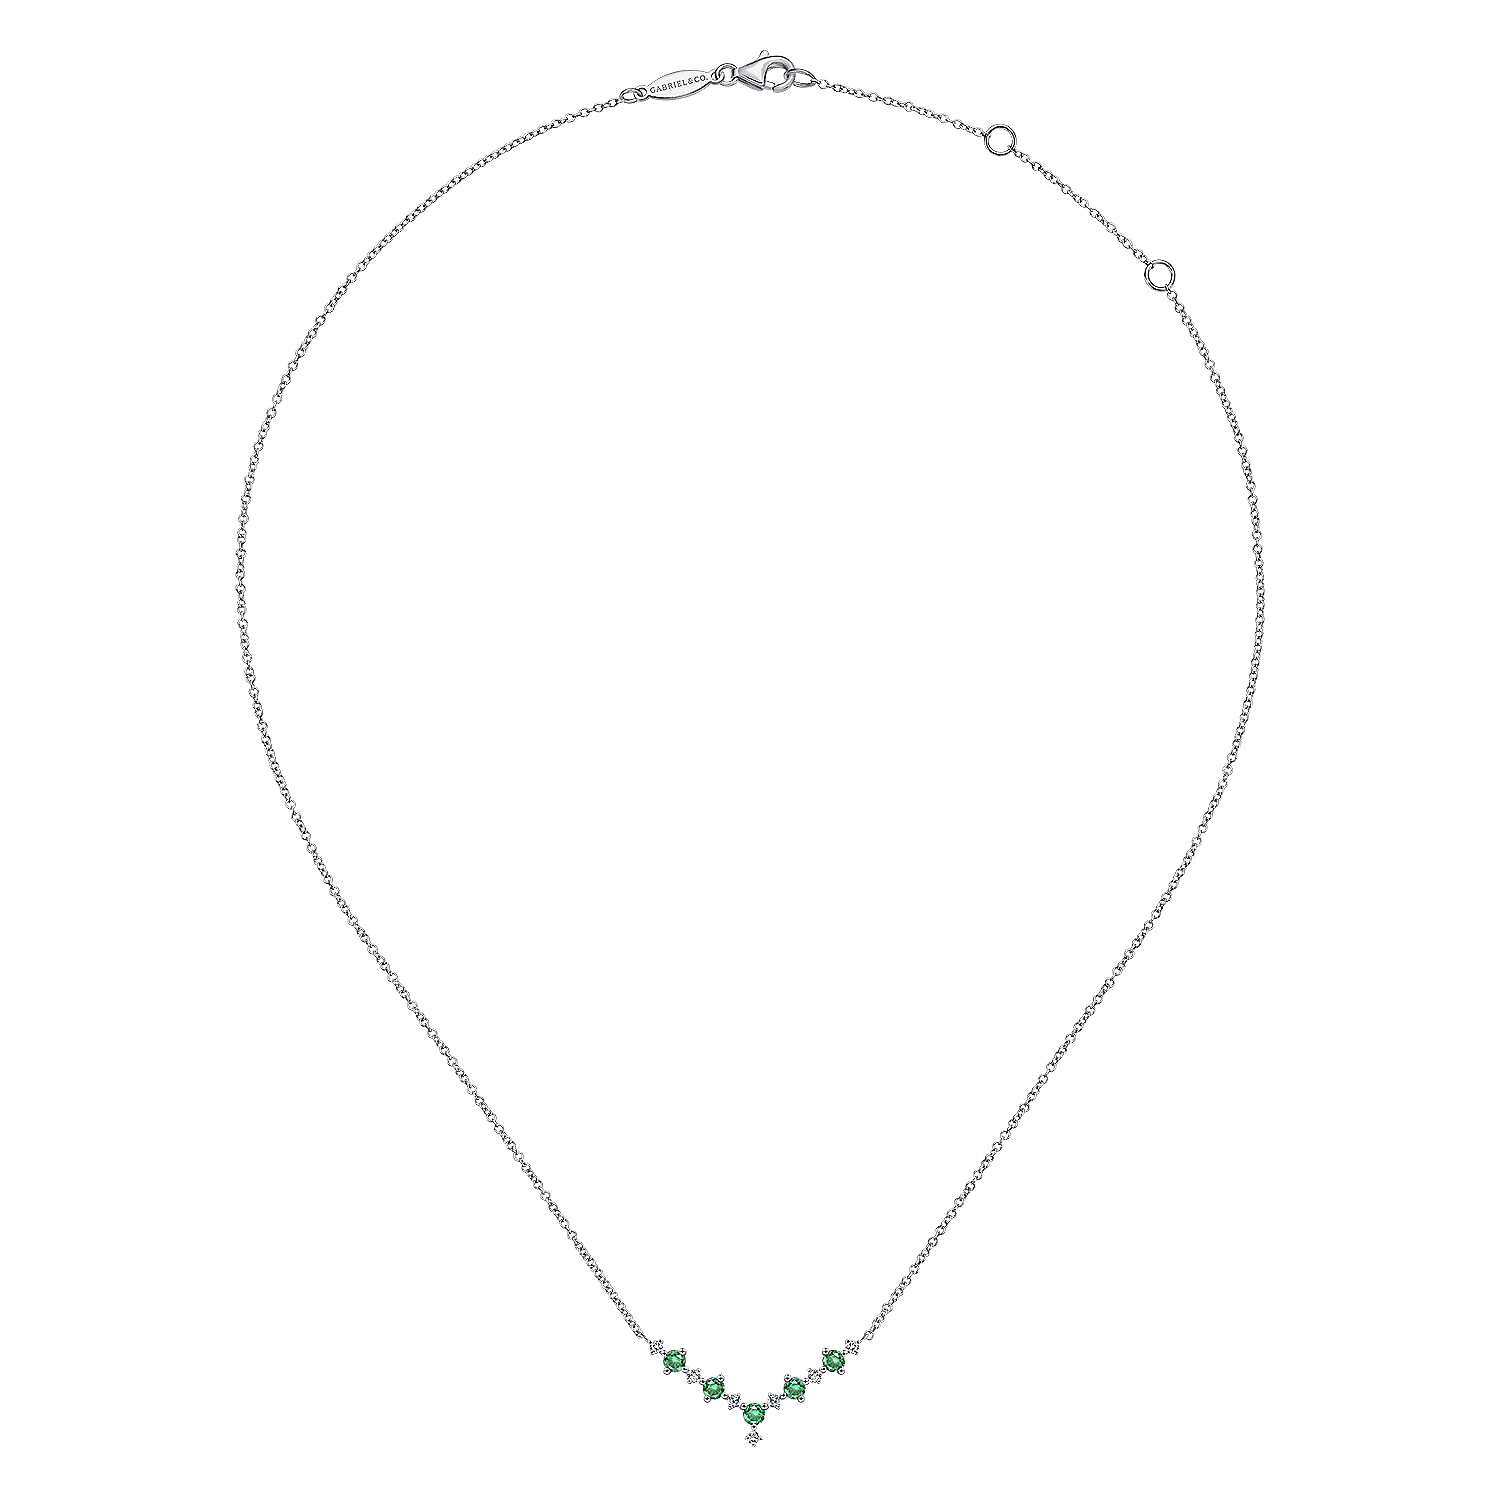 14K White Gold Diamond and Emerald Curved Bar Necklace